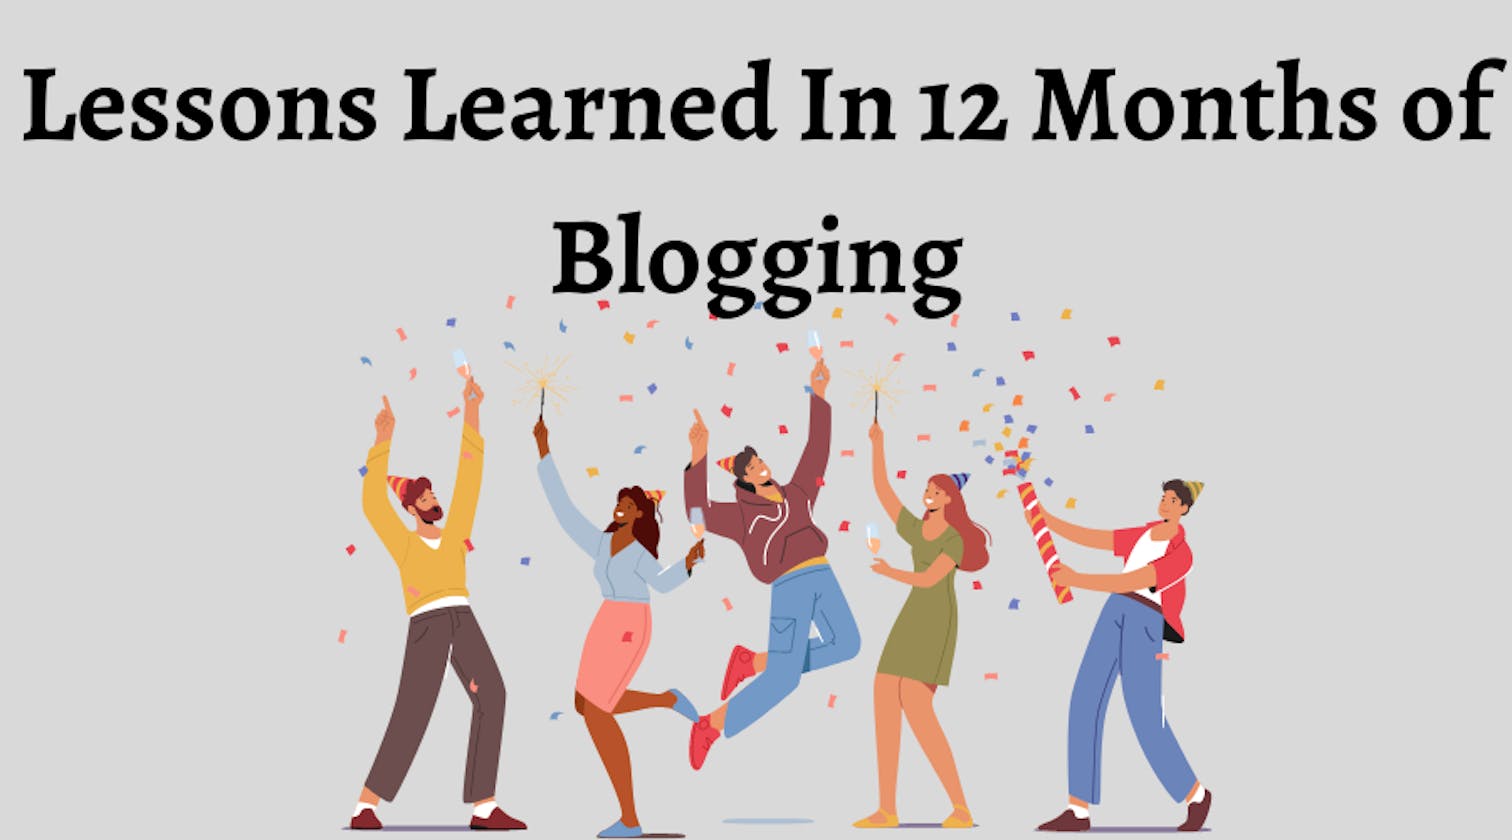 Lessons Learned In 12 Months of Blogging